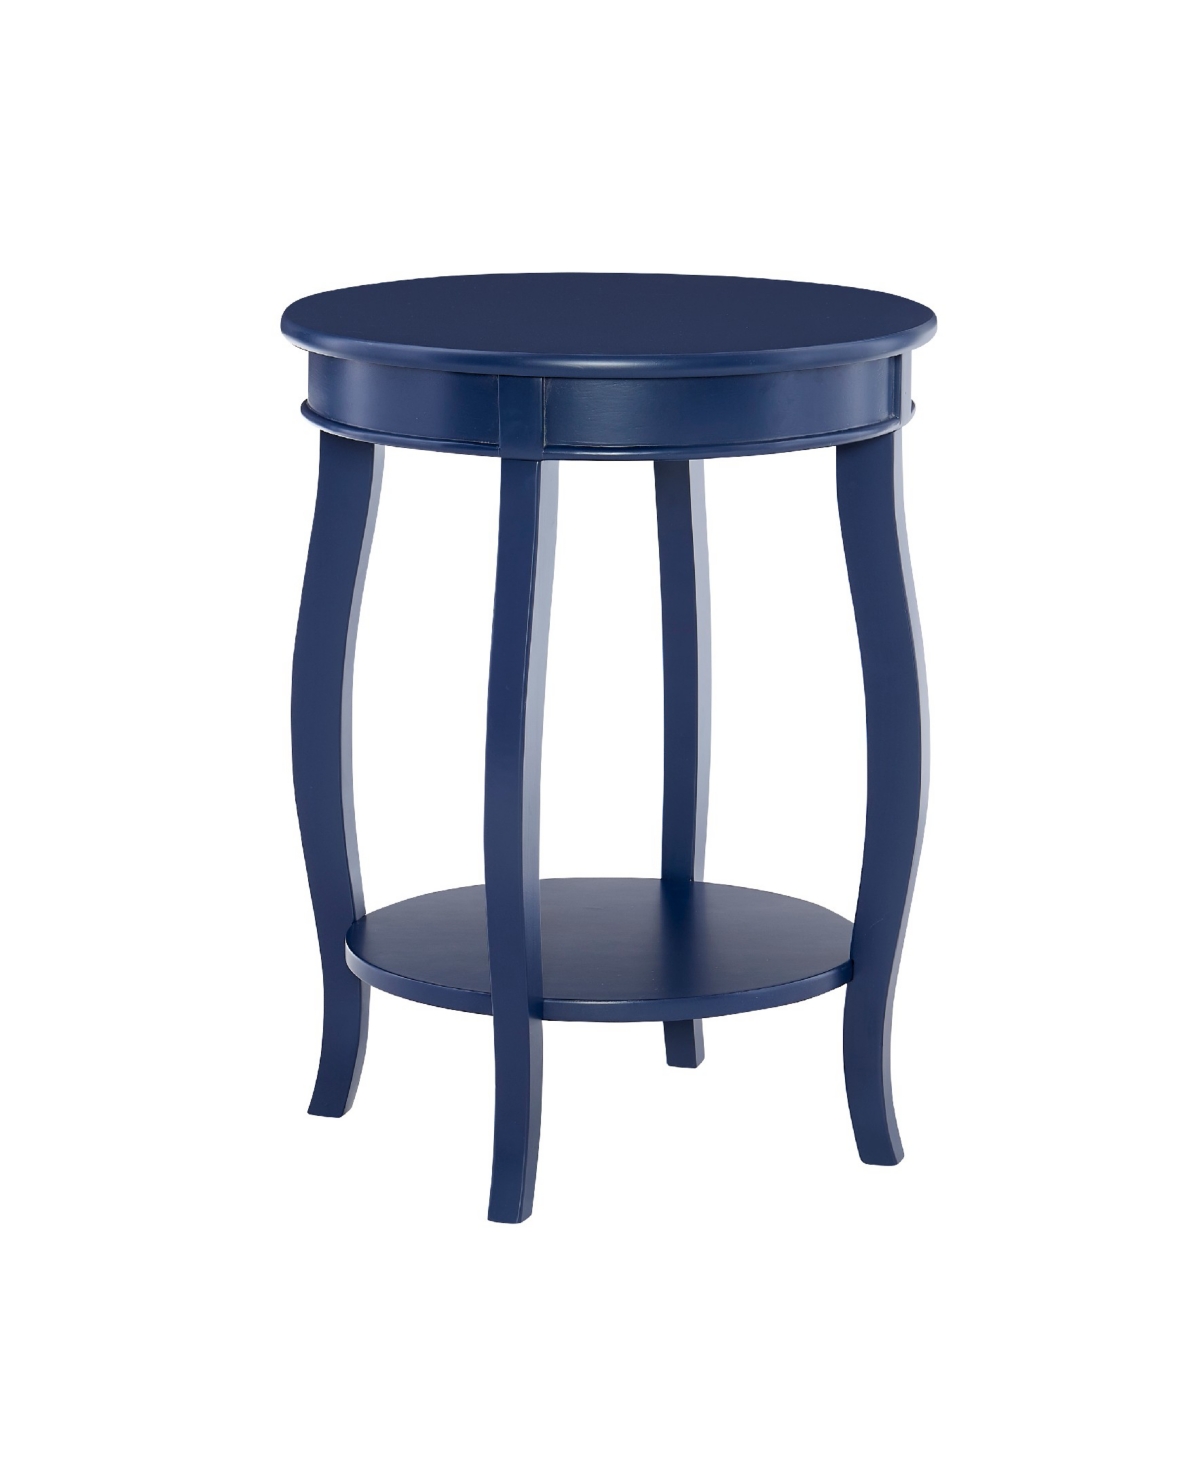 Linon Home Decor Powell Furniture Andover Round Side Table In Navy Blue